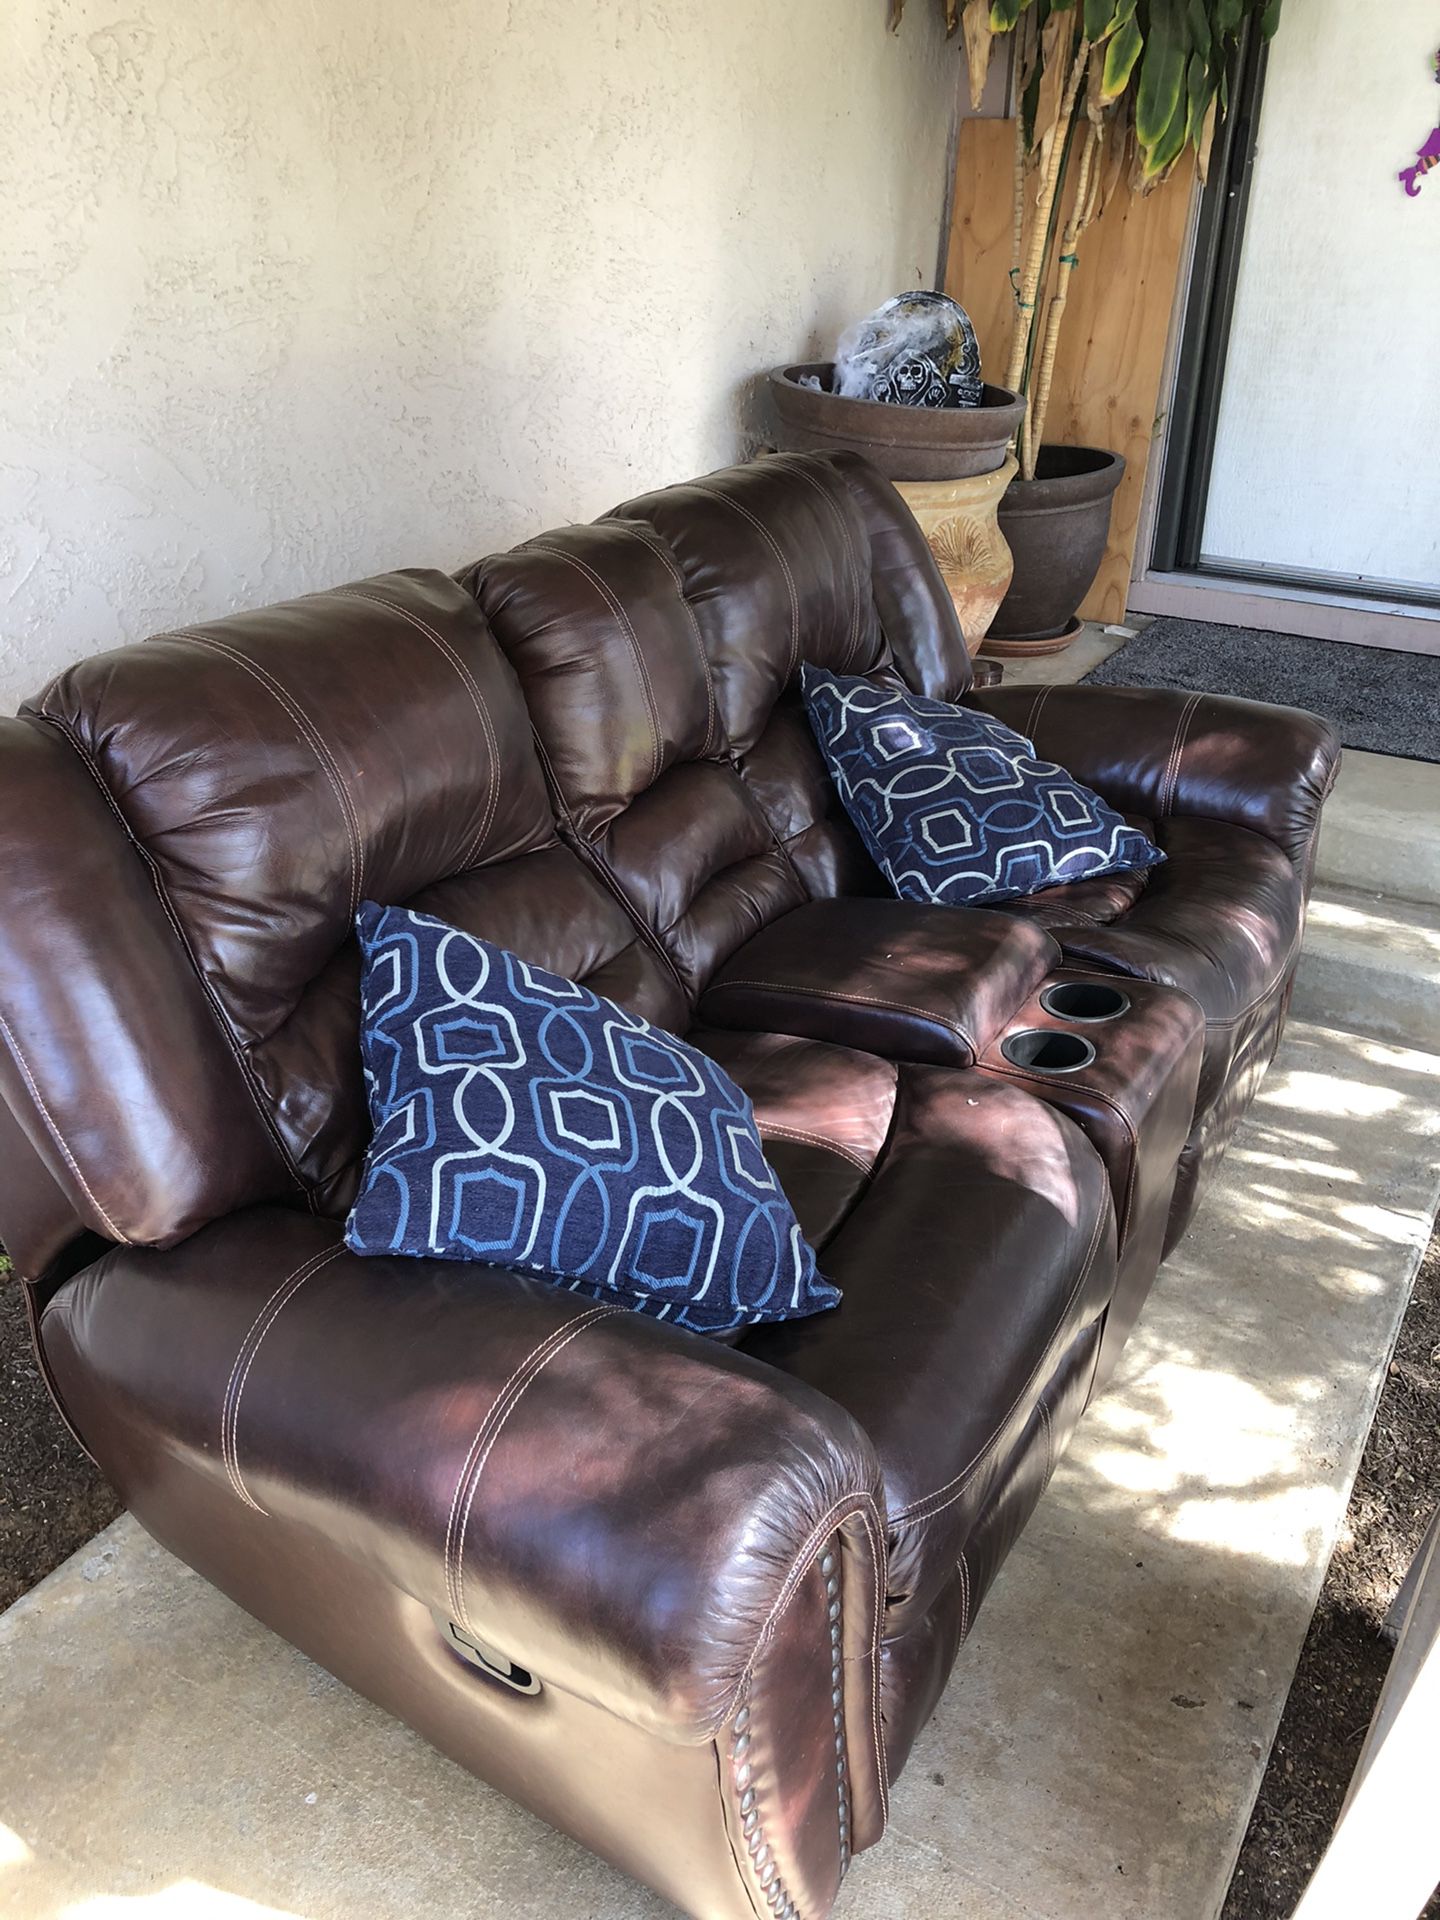 2 Leather Sofas FREE! You Haul Them.